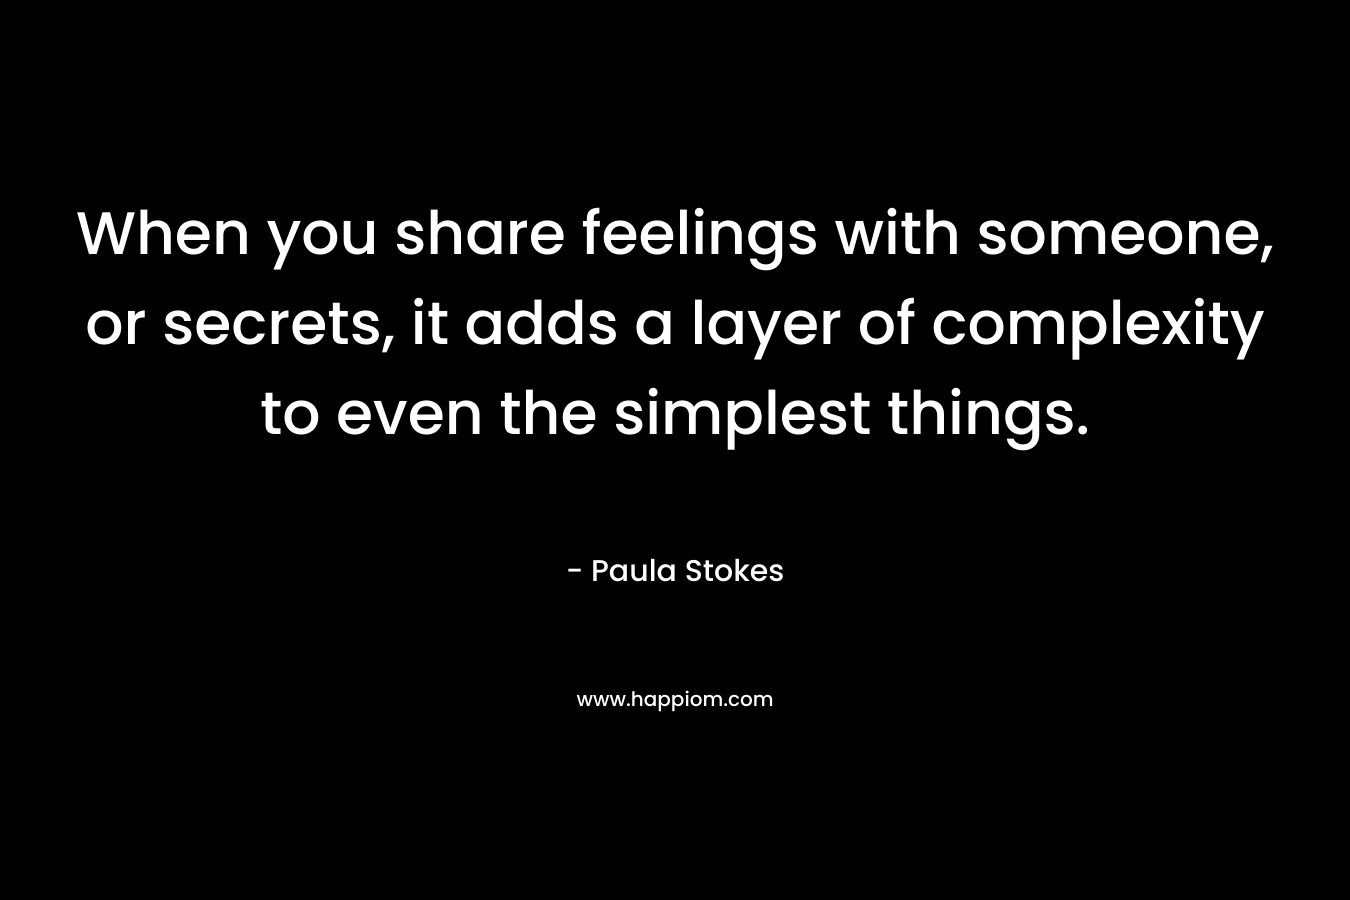 When you share feelings with someone, or secrets, it adds a layer of complexity to even the simplest things.